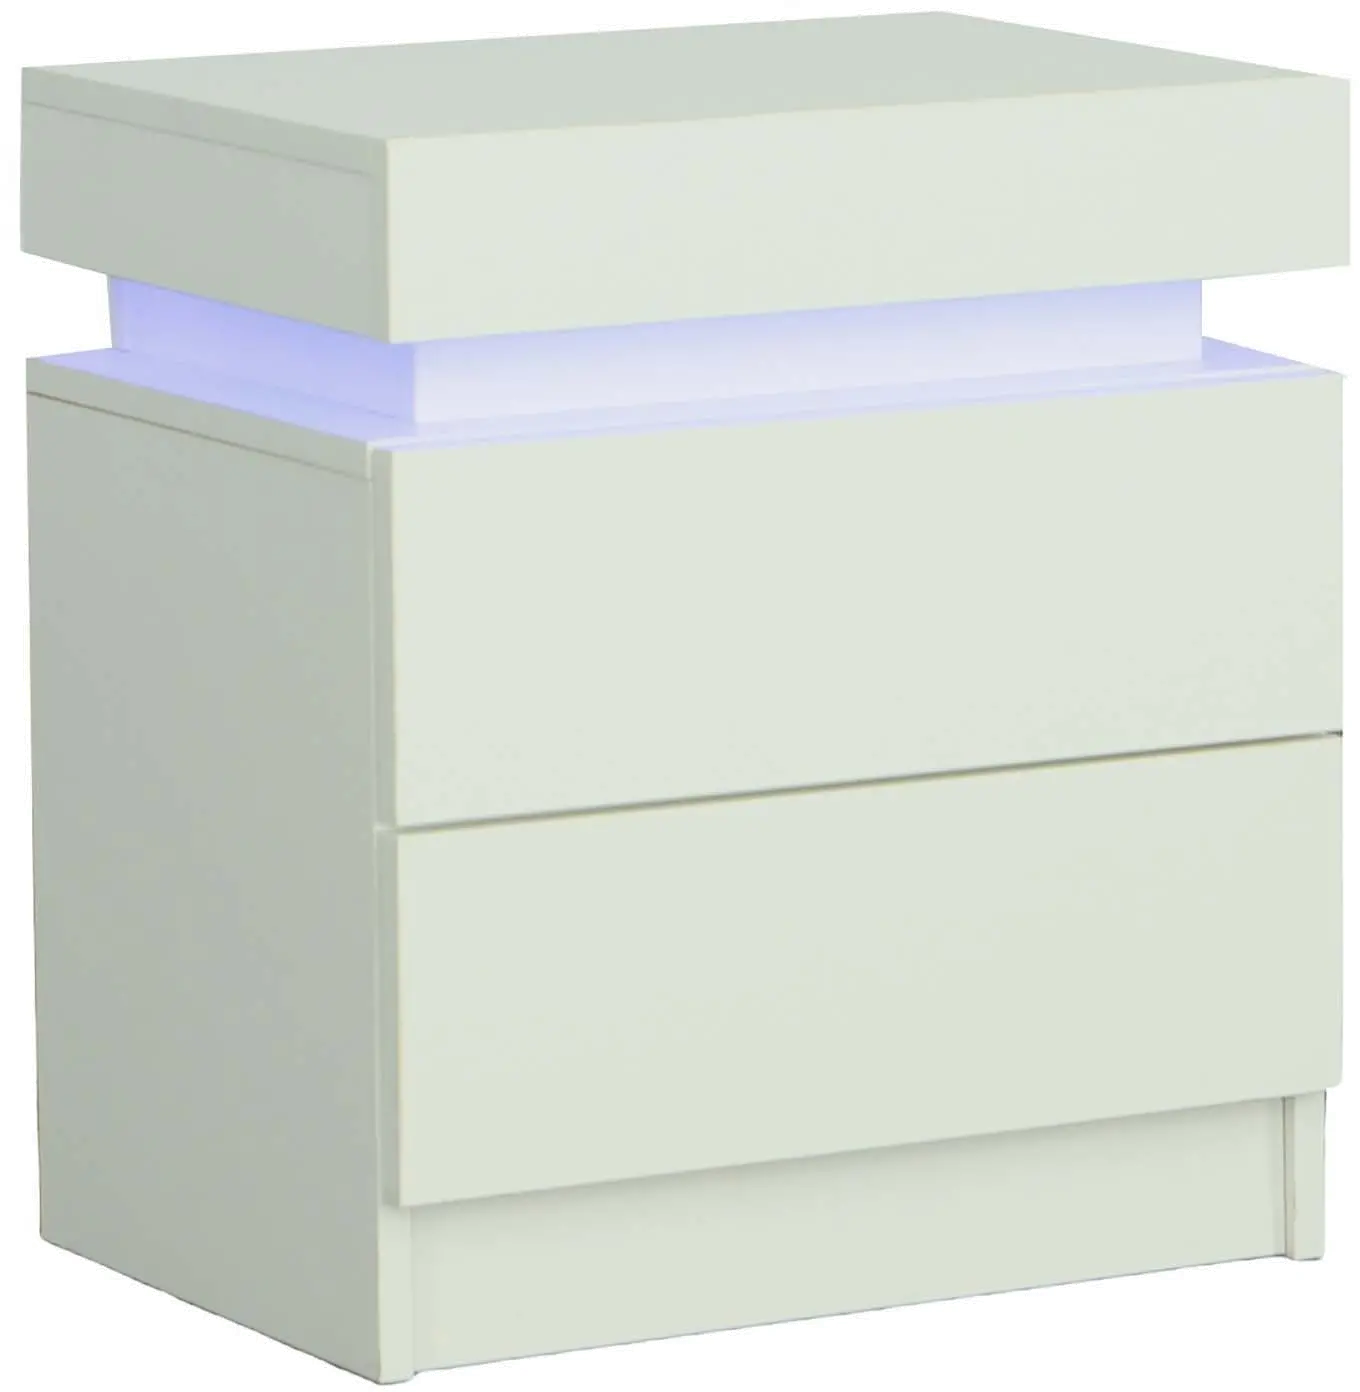 Dreamy White Nightstand with LED Light